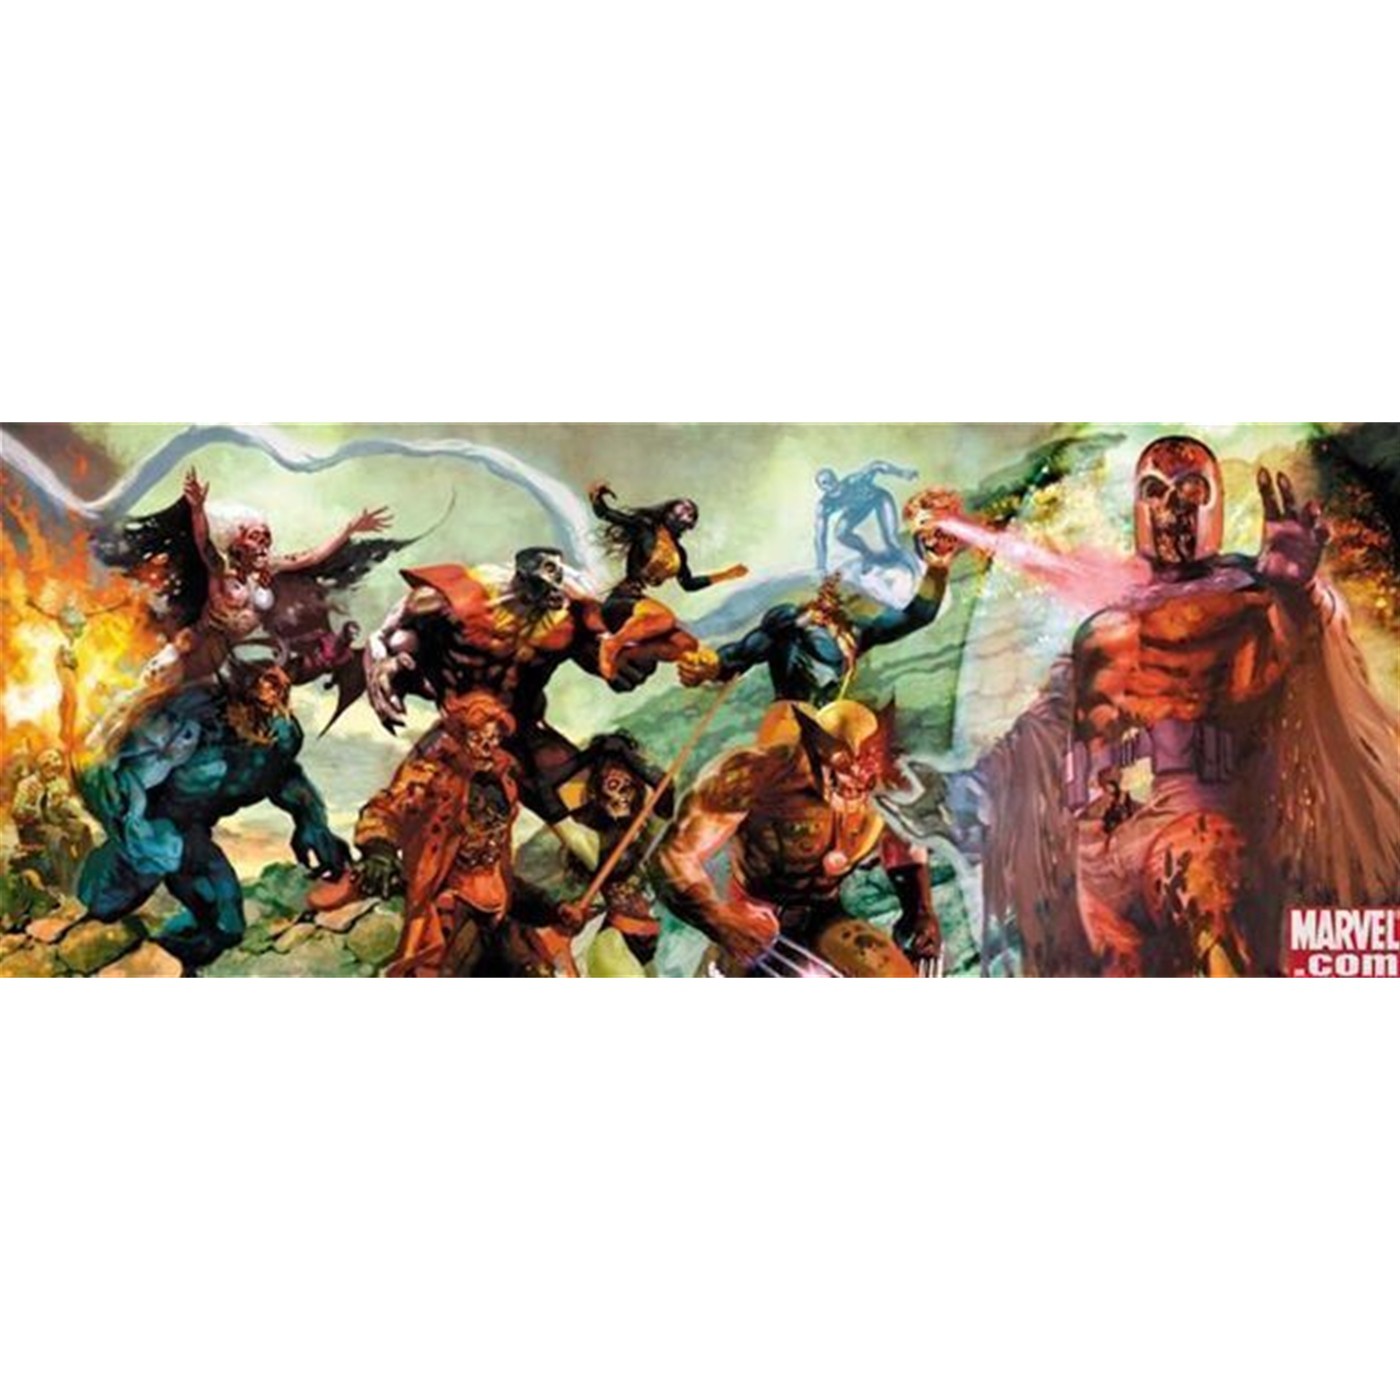 Marvel Zombies Poster Dead Days